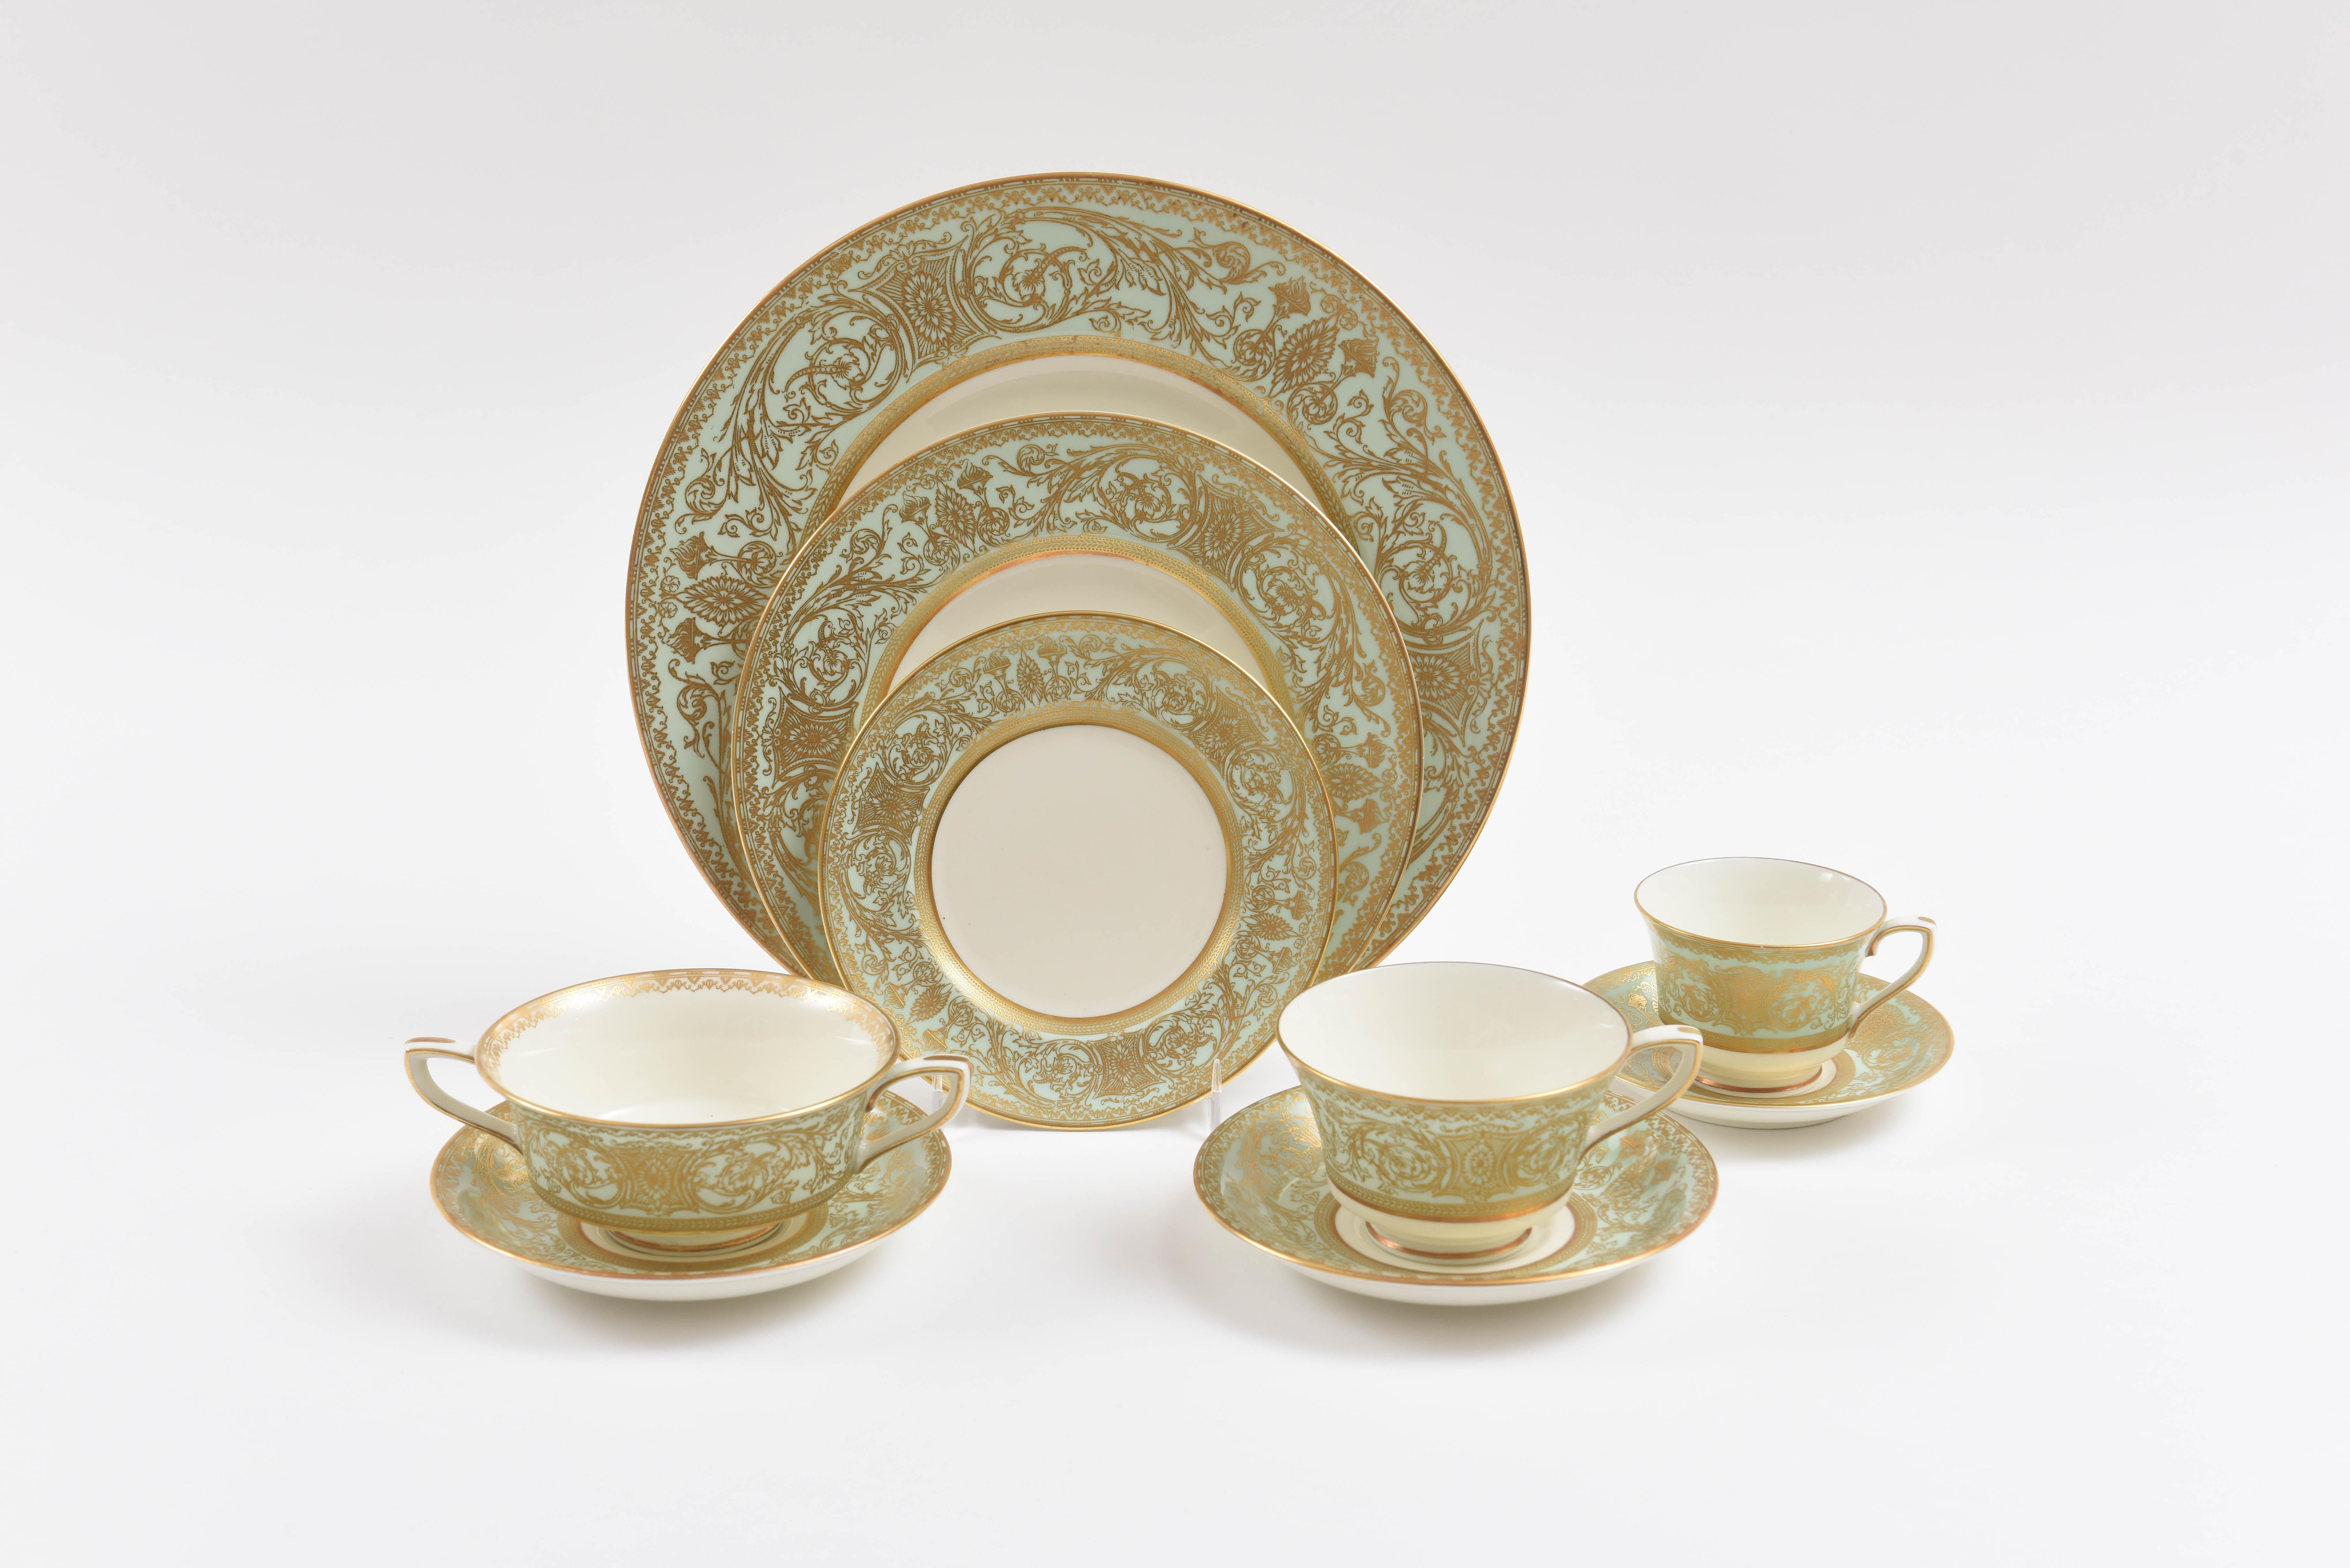 Gold Extensive English Porcelain Service for 12, Lovely Sage Mint Green Gilded 106 Pc